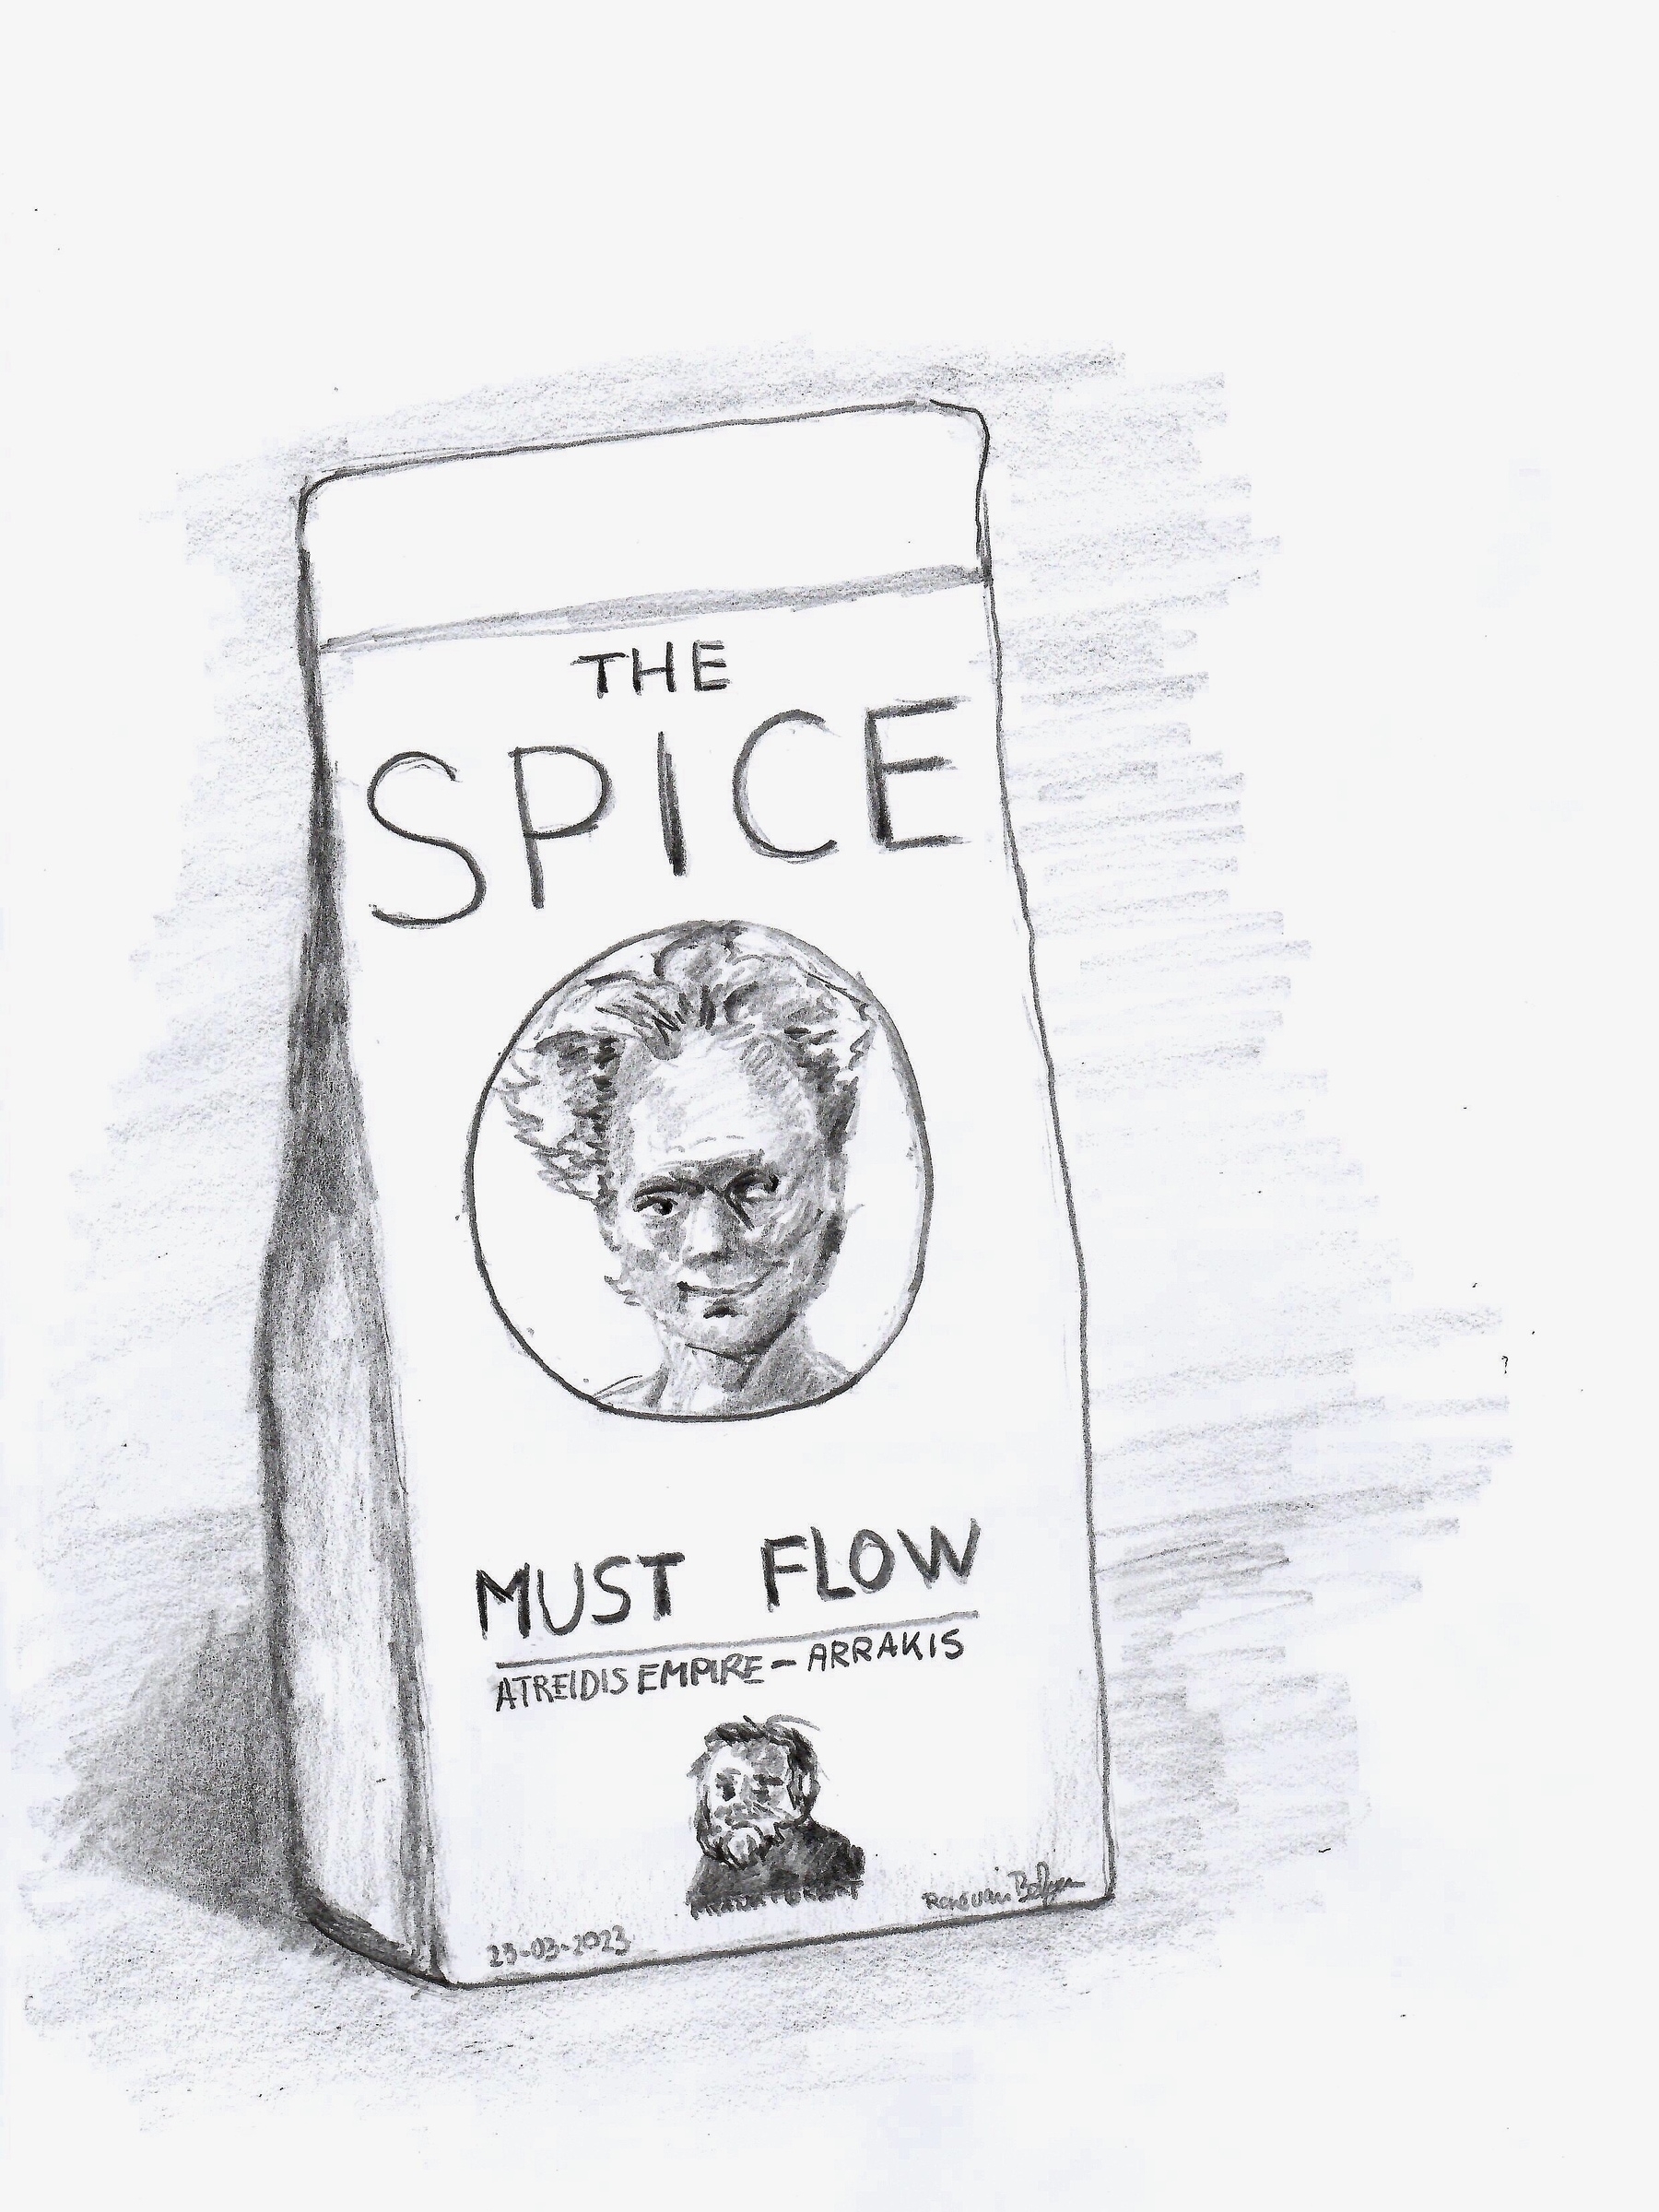 pencil sketch of bag of spice from the fictional world of Dune by Frank Herbert, stating The Spice Must Flow